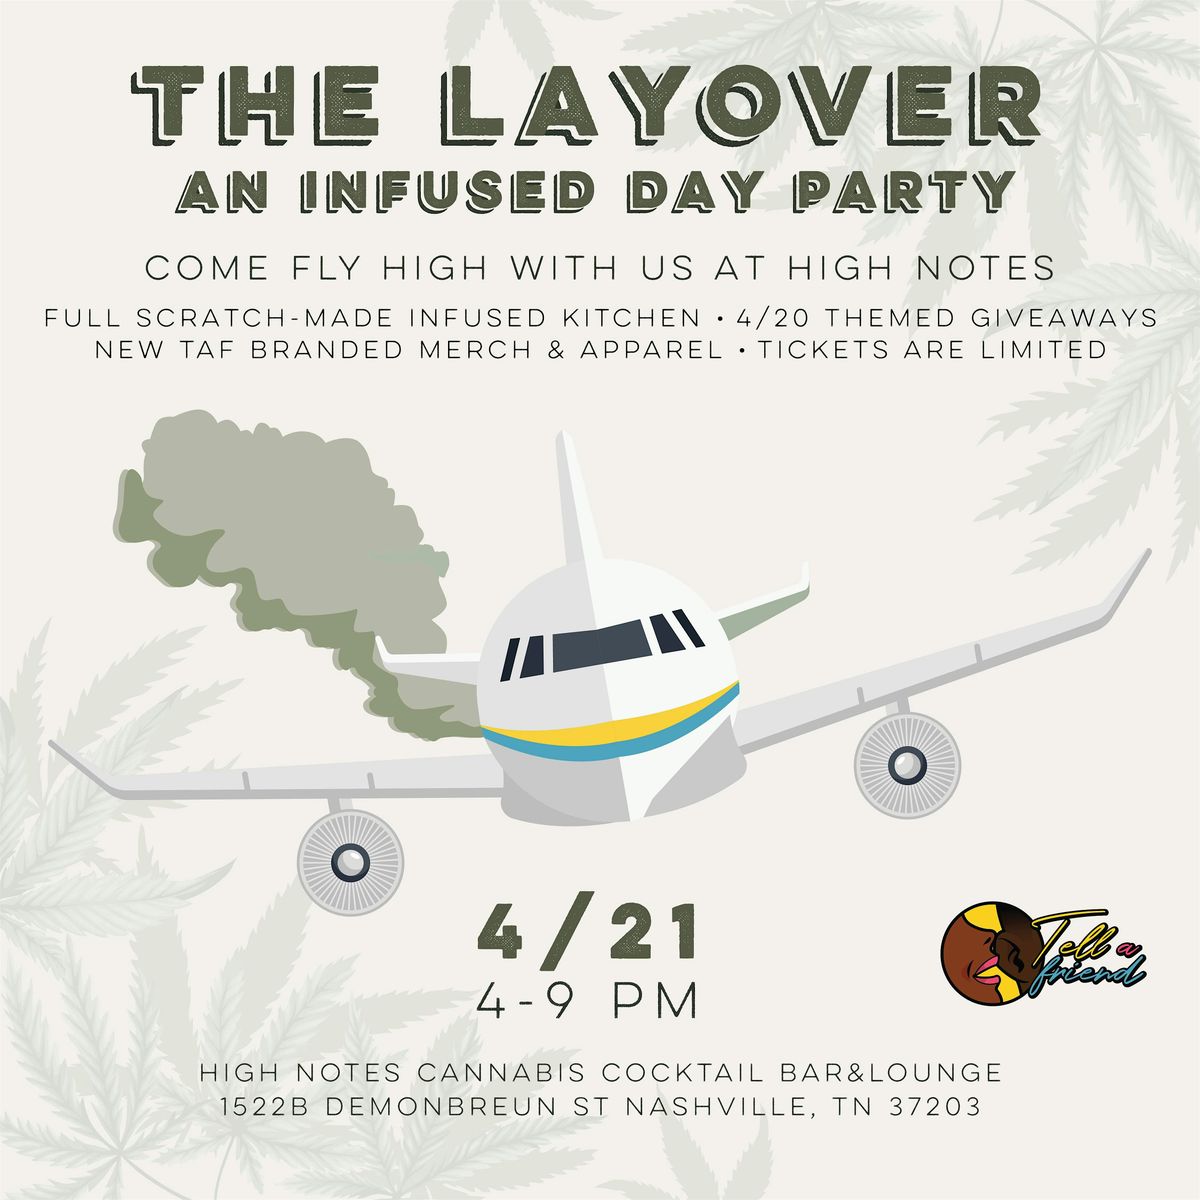 The Layover - Nashville's Hottest Infused Day Party!